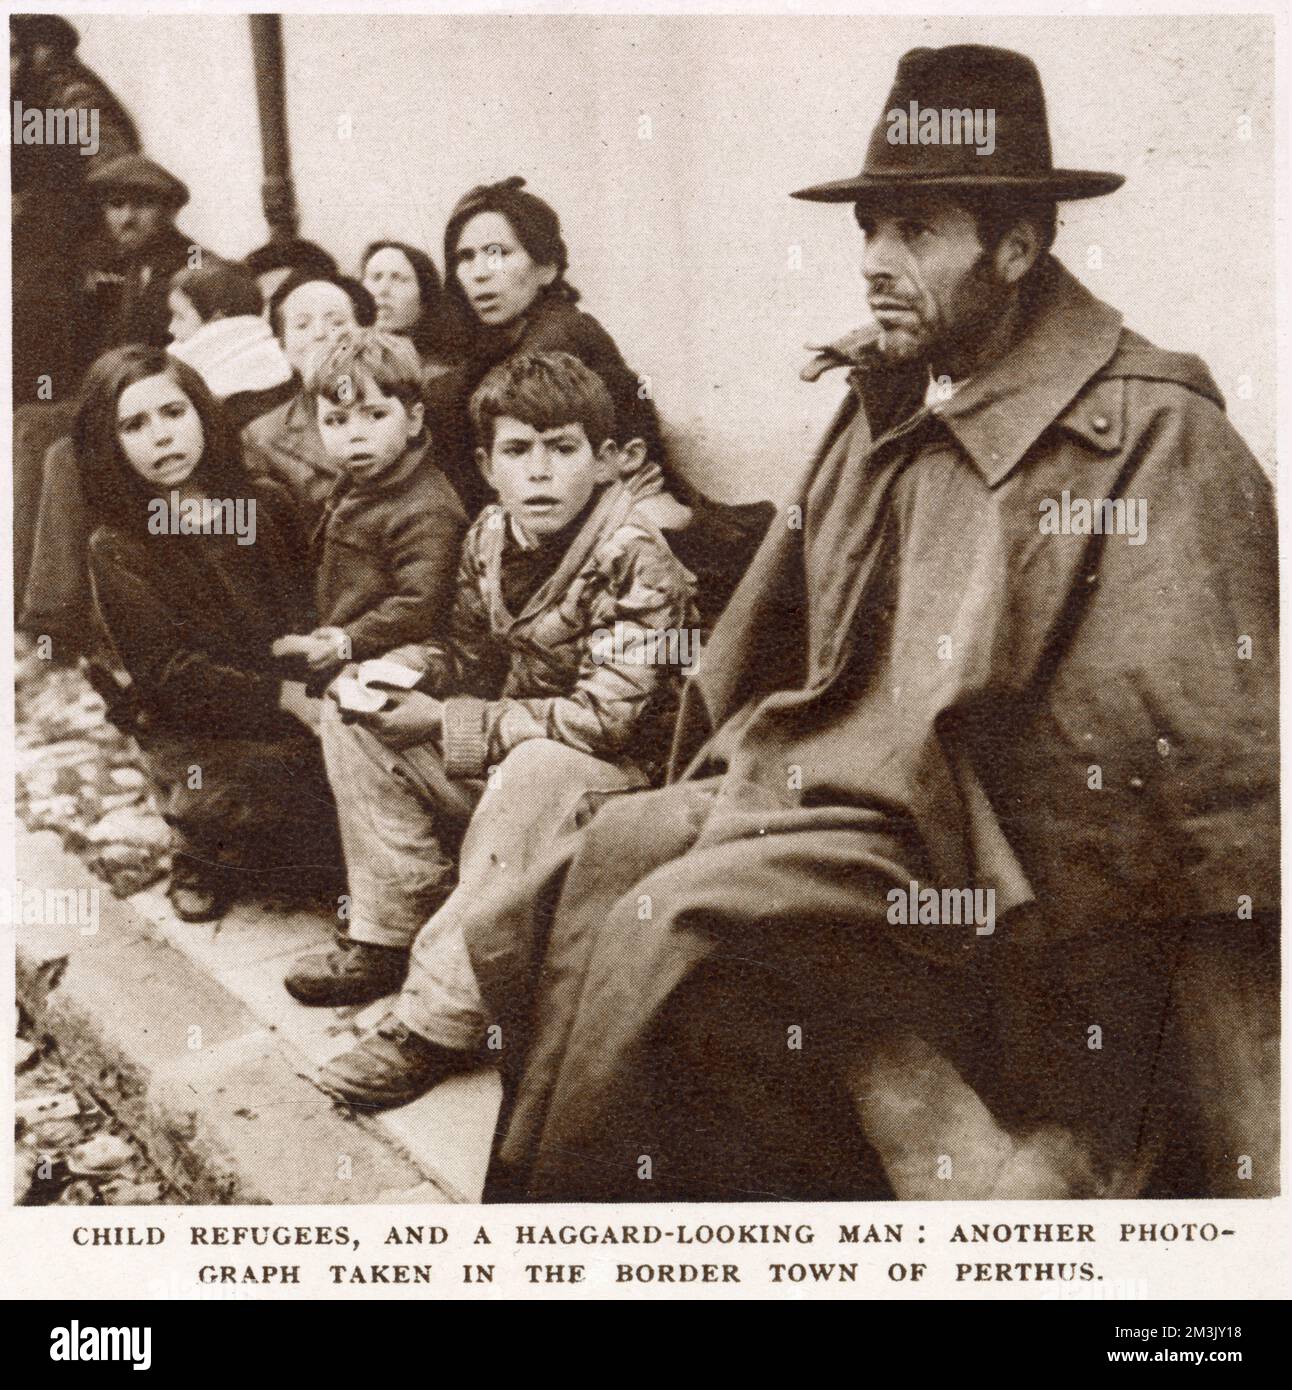 A group of Spanish refugees, at the end of the Spanish Civil War, in Perthus, France. When the Nationalist Army finally won the Spanish Civil War, in 1939, a great number of the defeated Republican soldiers and supporters fled to France. They feared (correctly) that the blood-letting would continue until General Franco and the Nationalists felt they had driven socialism and the Republicans from Spain. Stock Photo